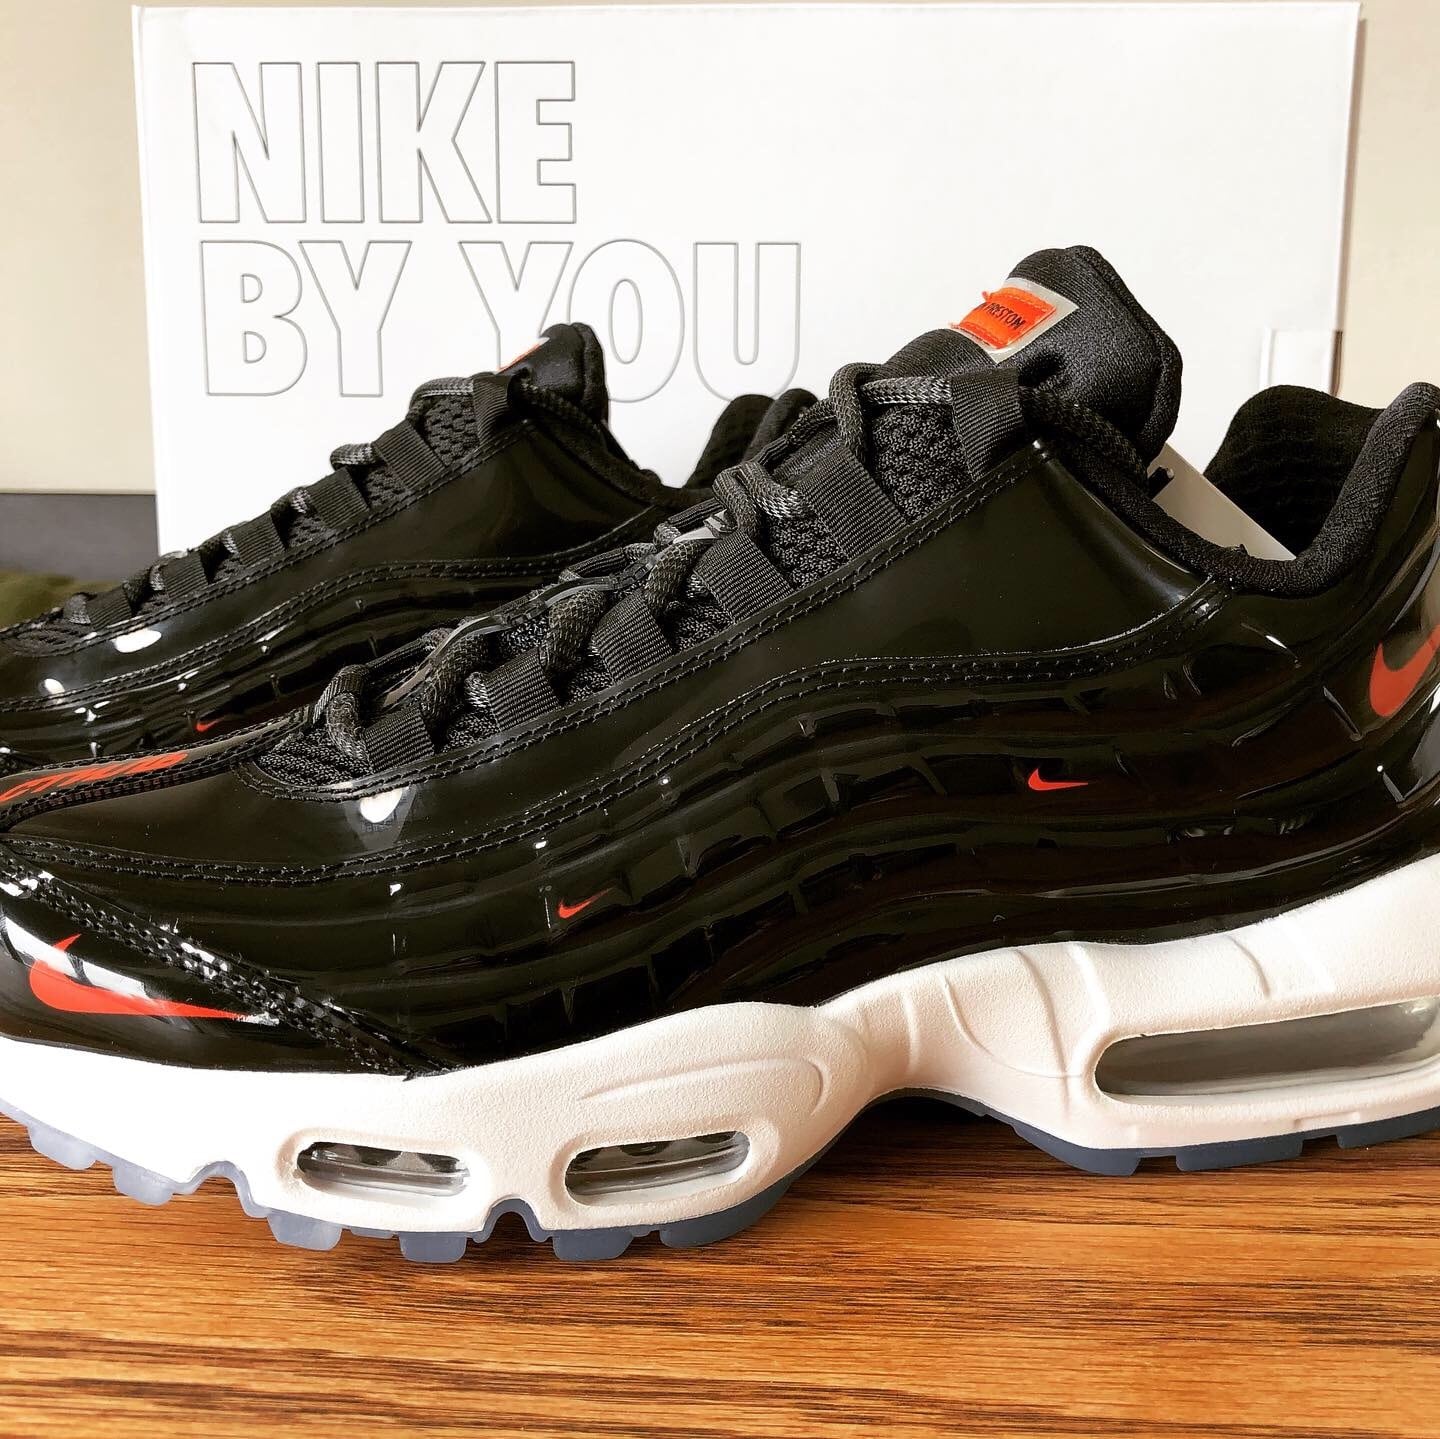 Nike Air Max 95 Heron Preston By You | THE HOOK TAILOR'S LOUNGE